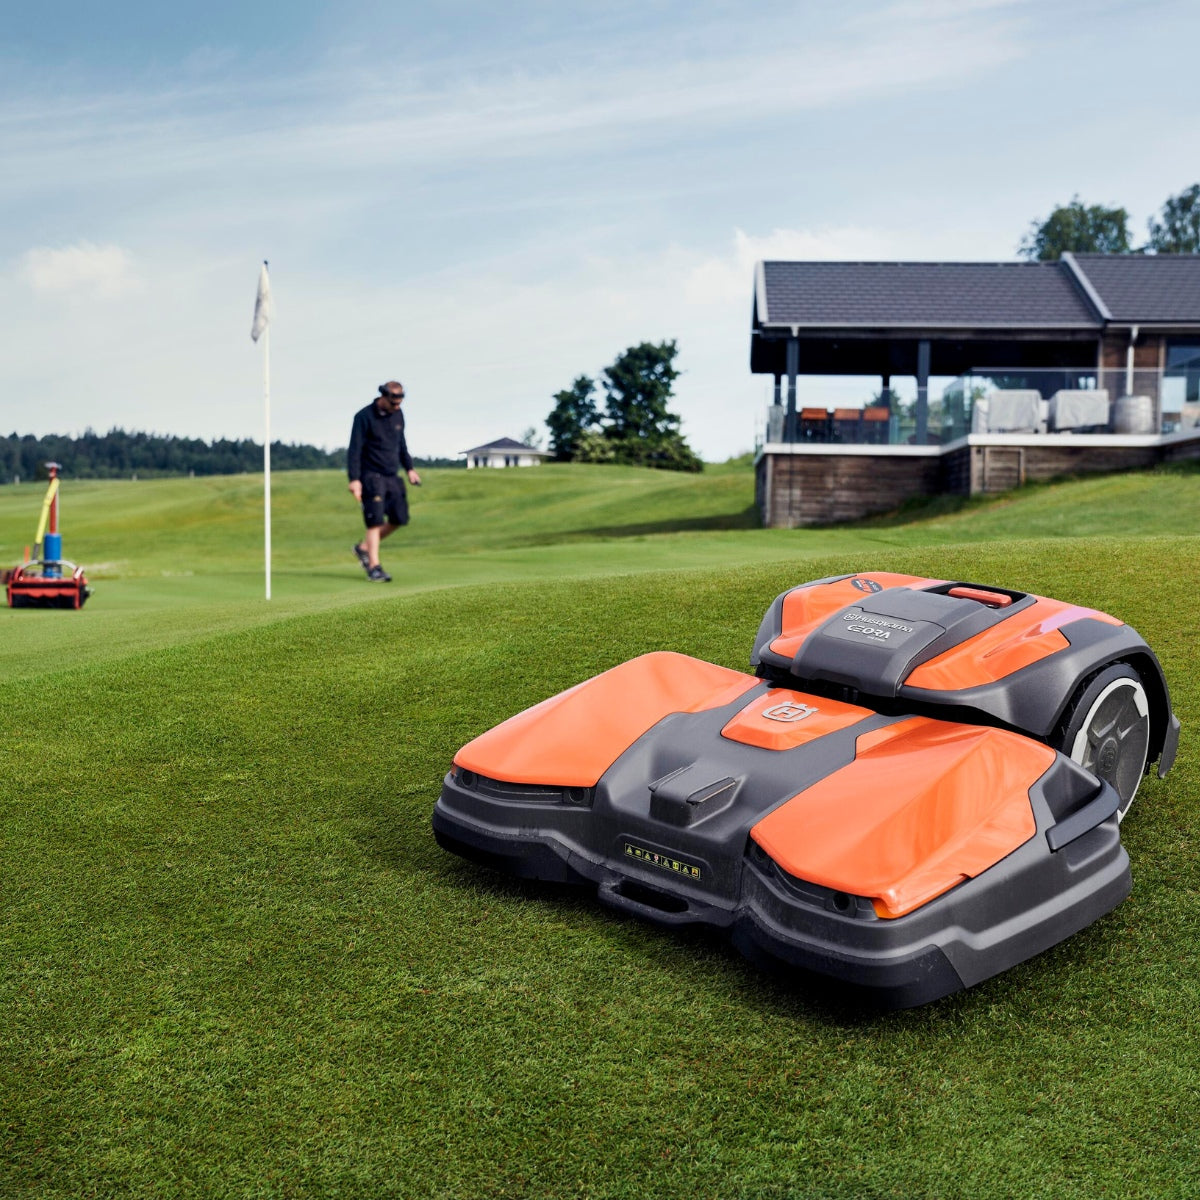 MowBot | Leaders in Robotic Mowing | Commercial | Husqvarna Pro Partner | CEORA | Robotic mowers for large green spaces